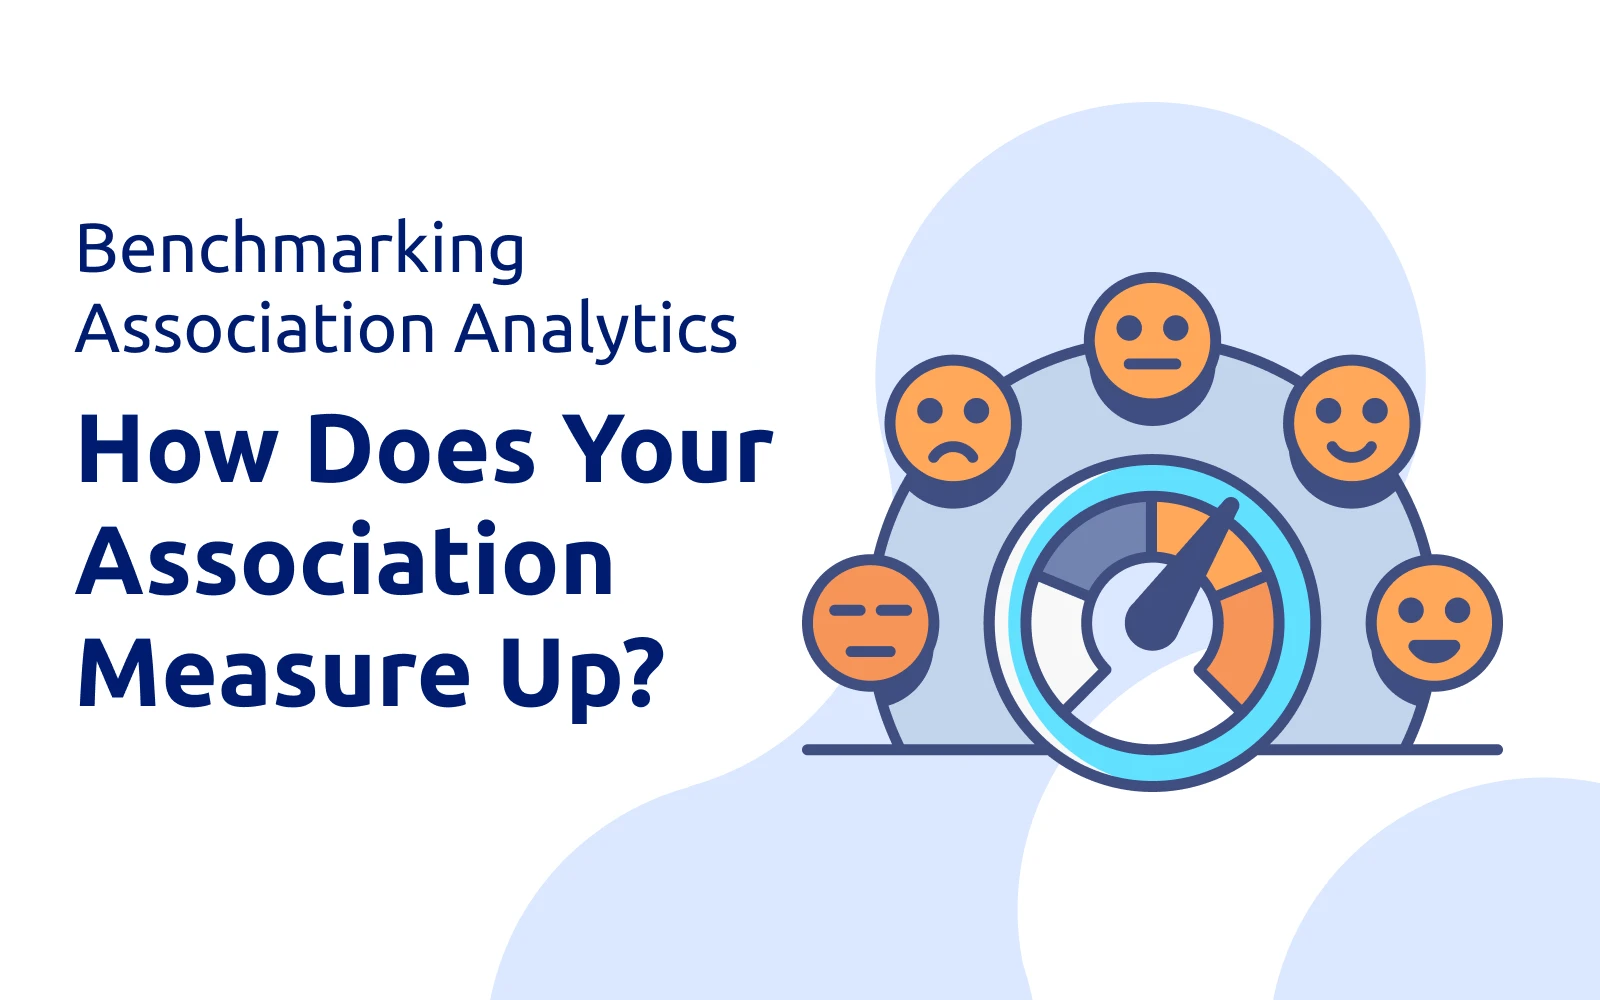 Benchmarking Association Analytics: How Does Your Association Measure Up?